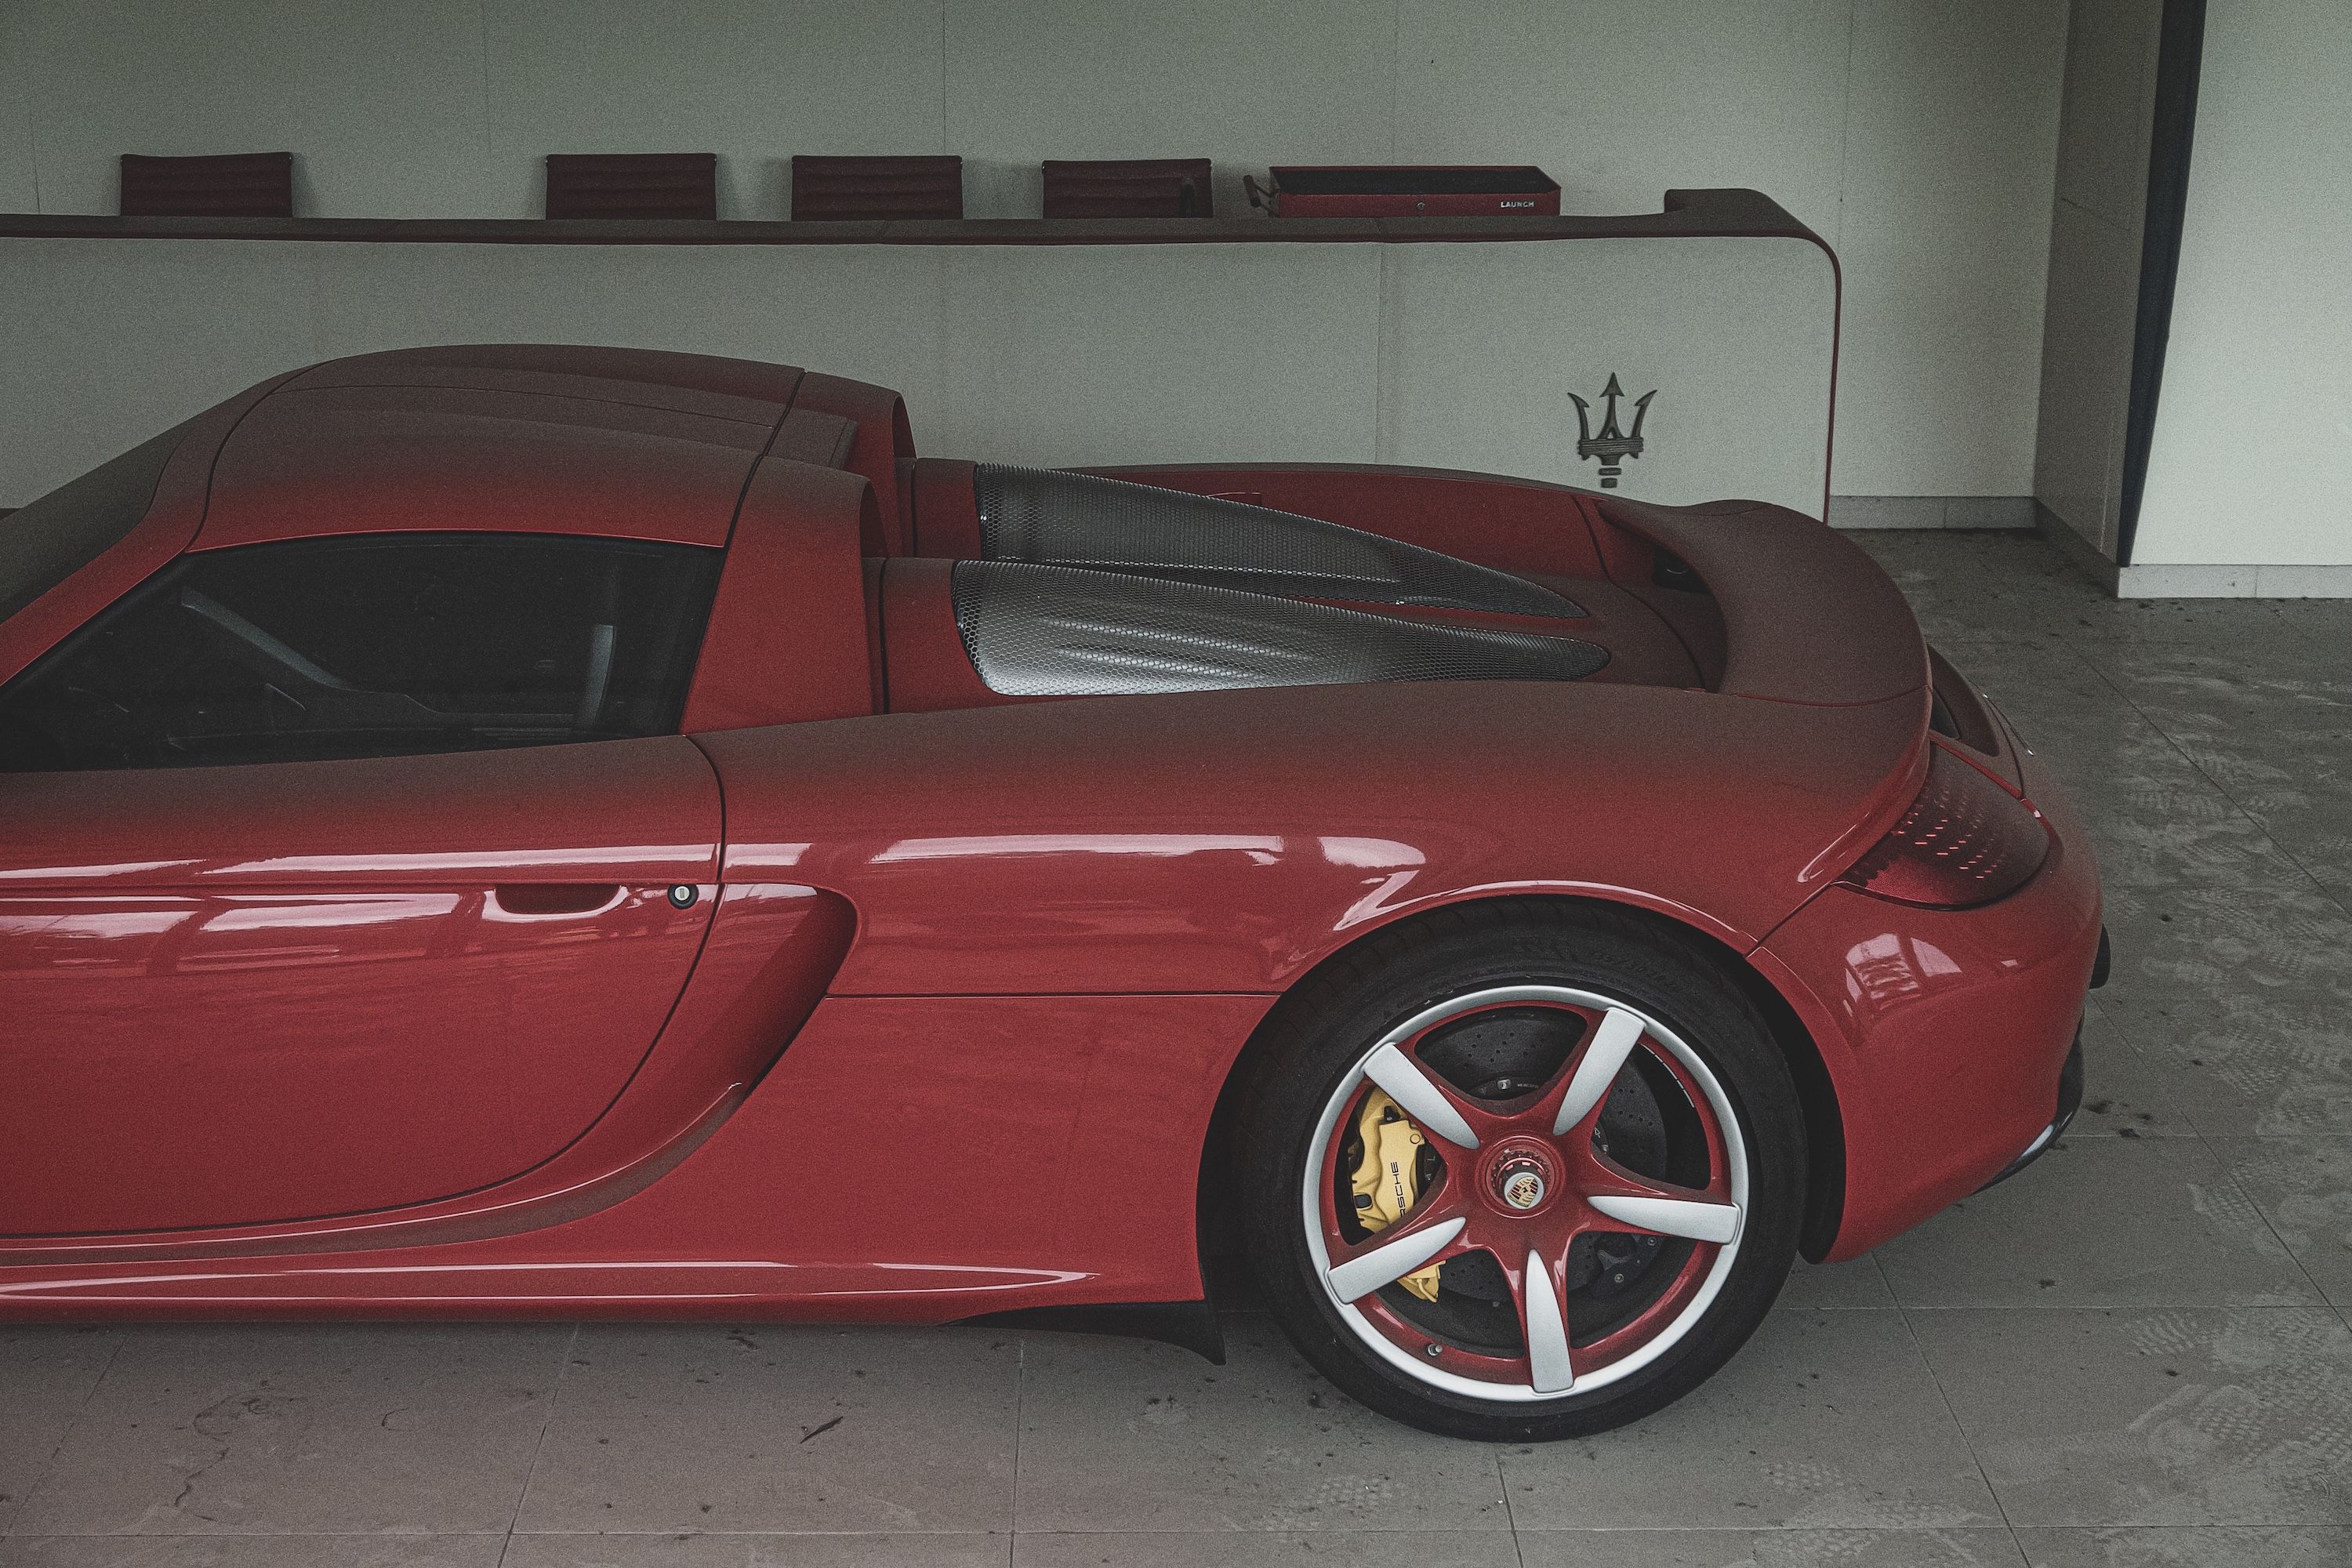 This Carrera GT Trapped in an Abandoned Chinese Dealership